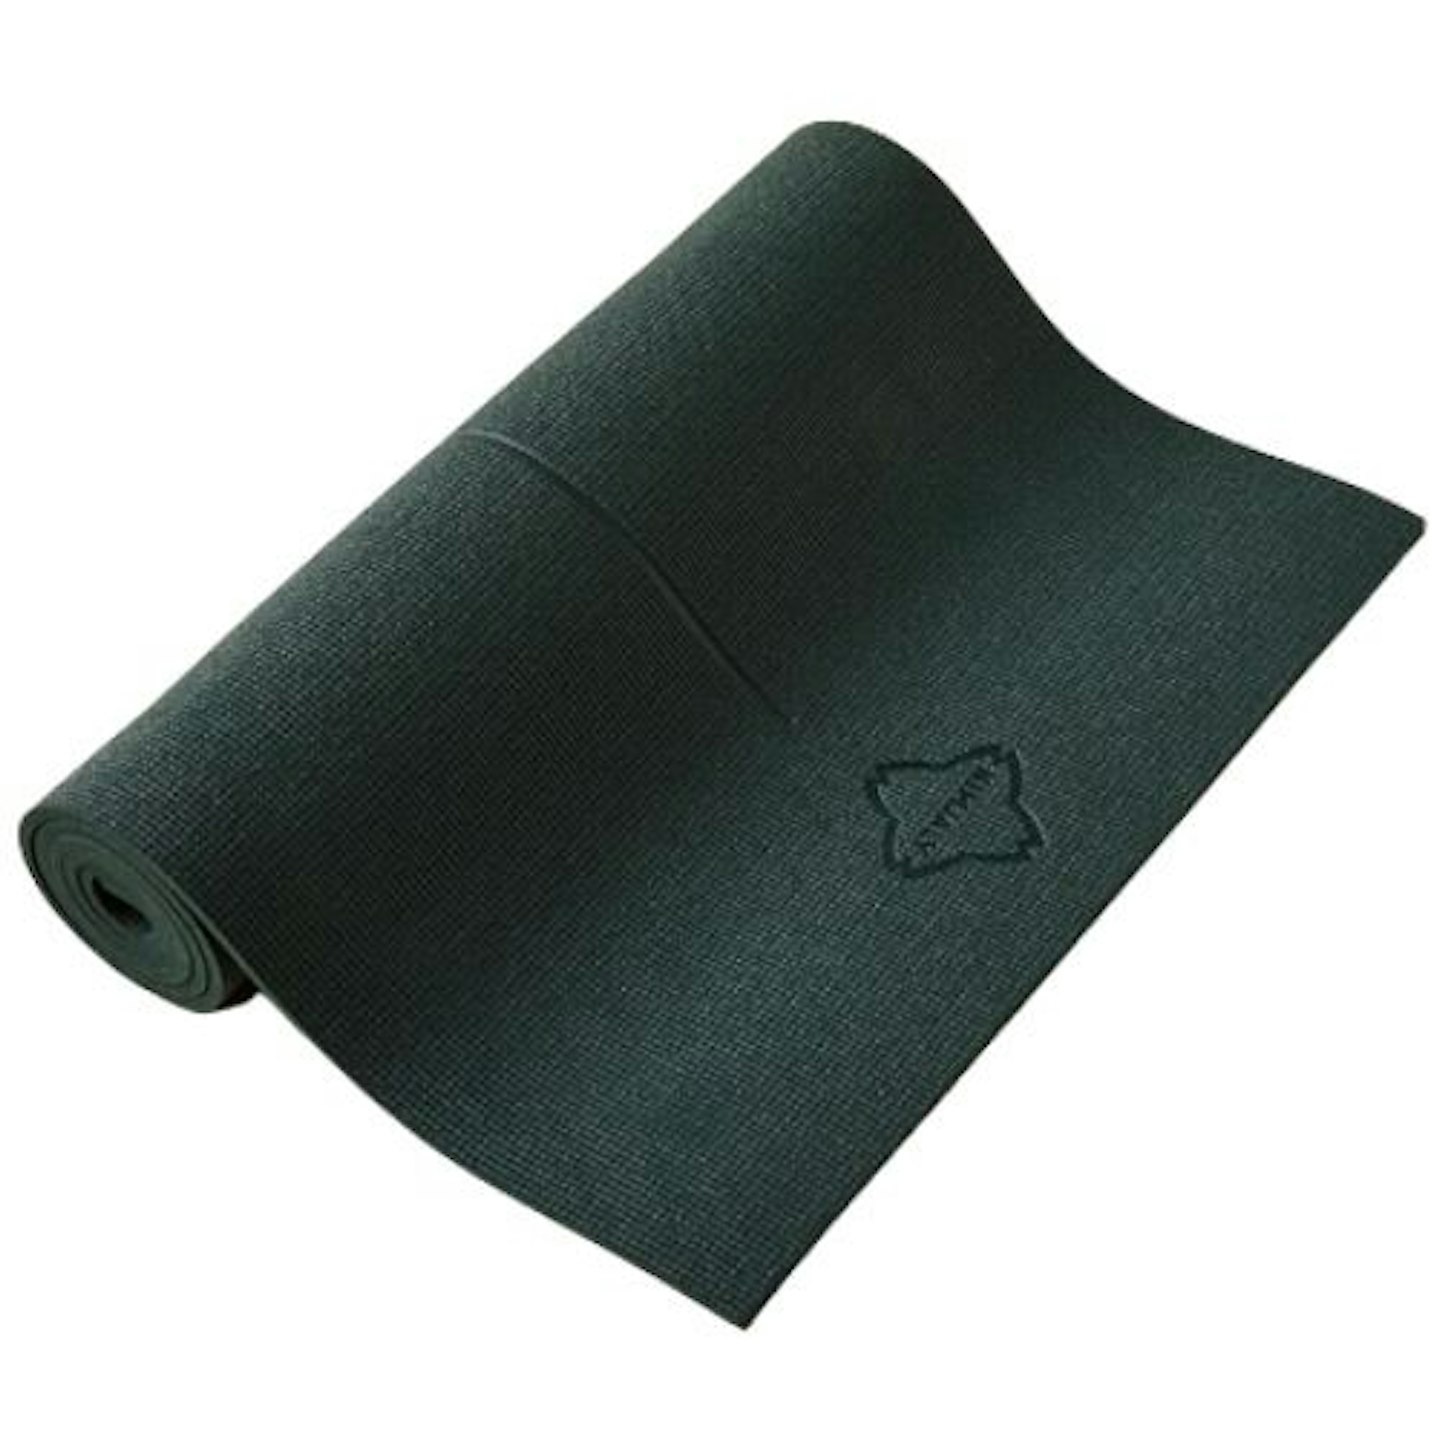 2) All About Decathlon's Domyos Yoga mat (8mm): Highly recommended